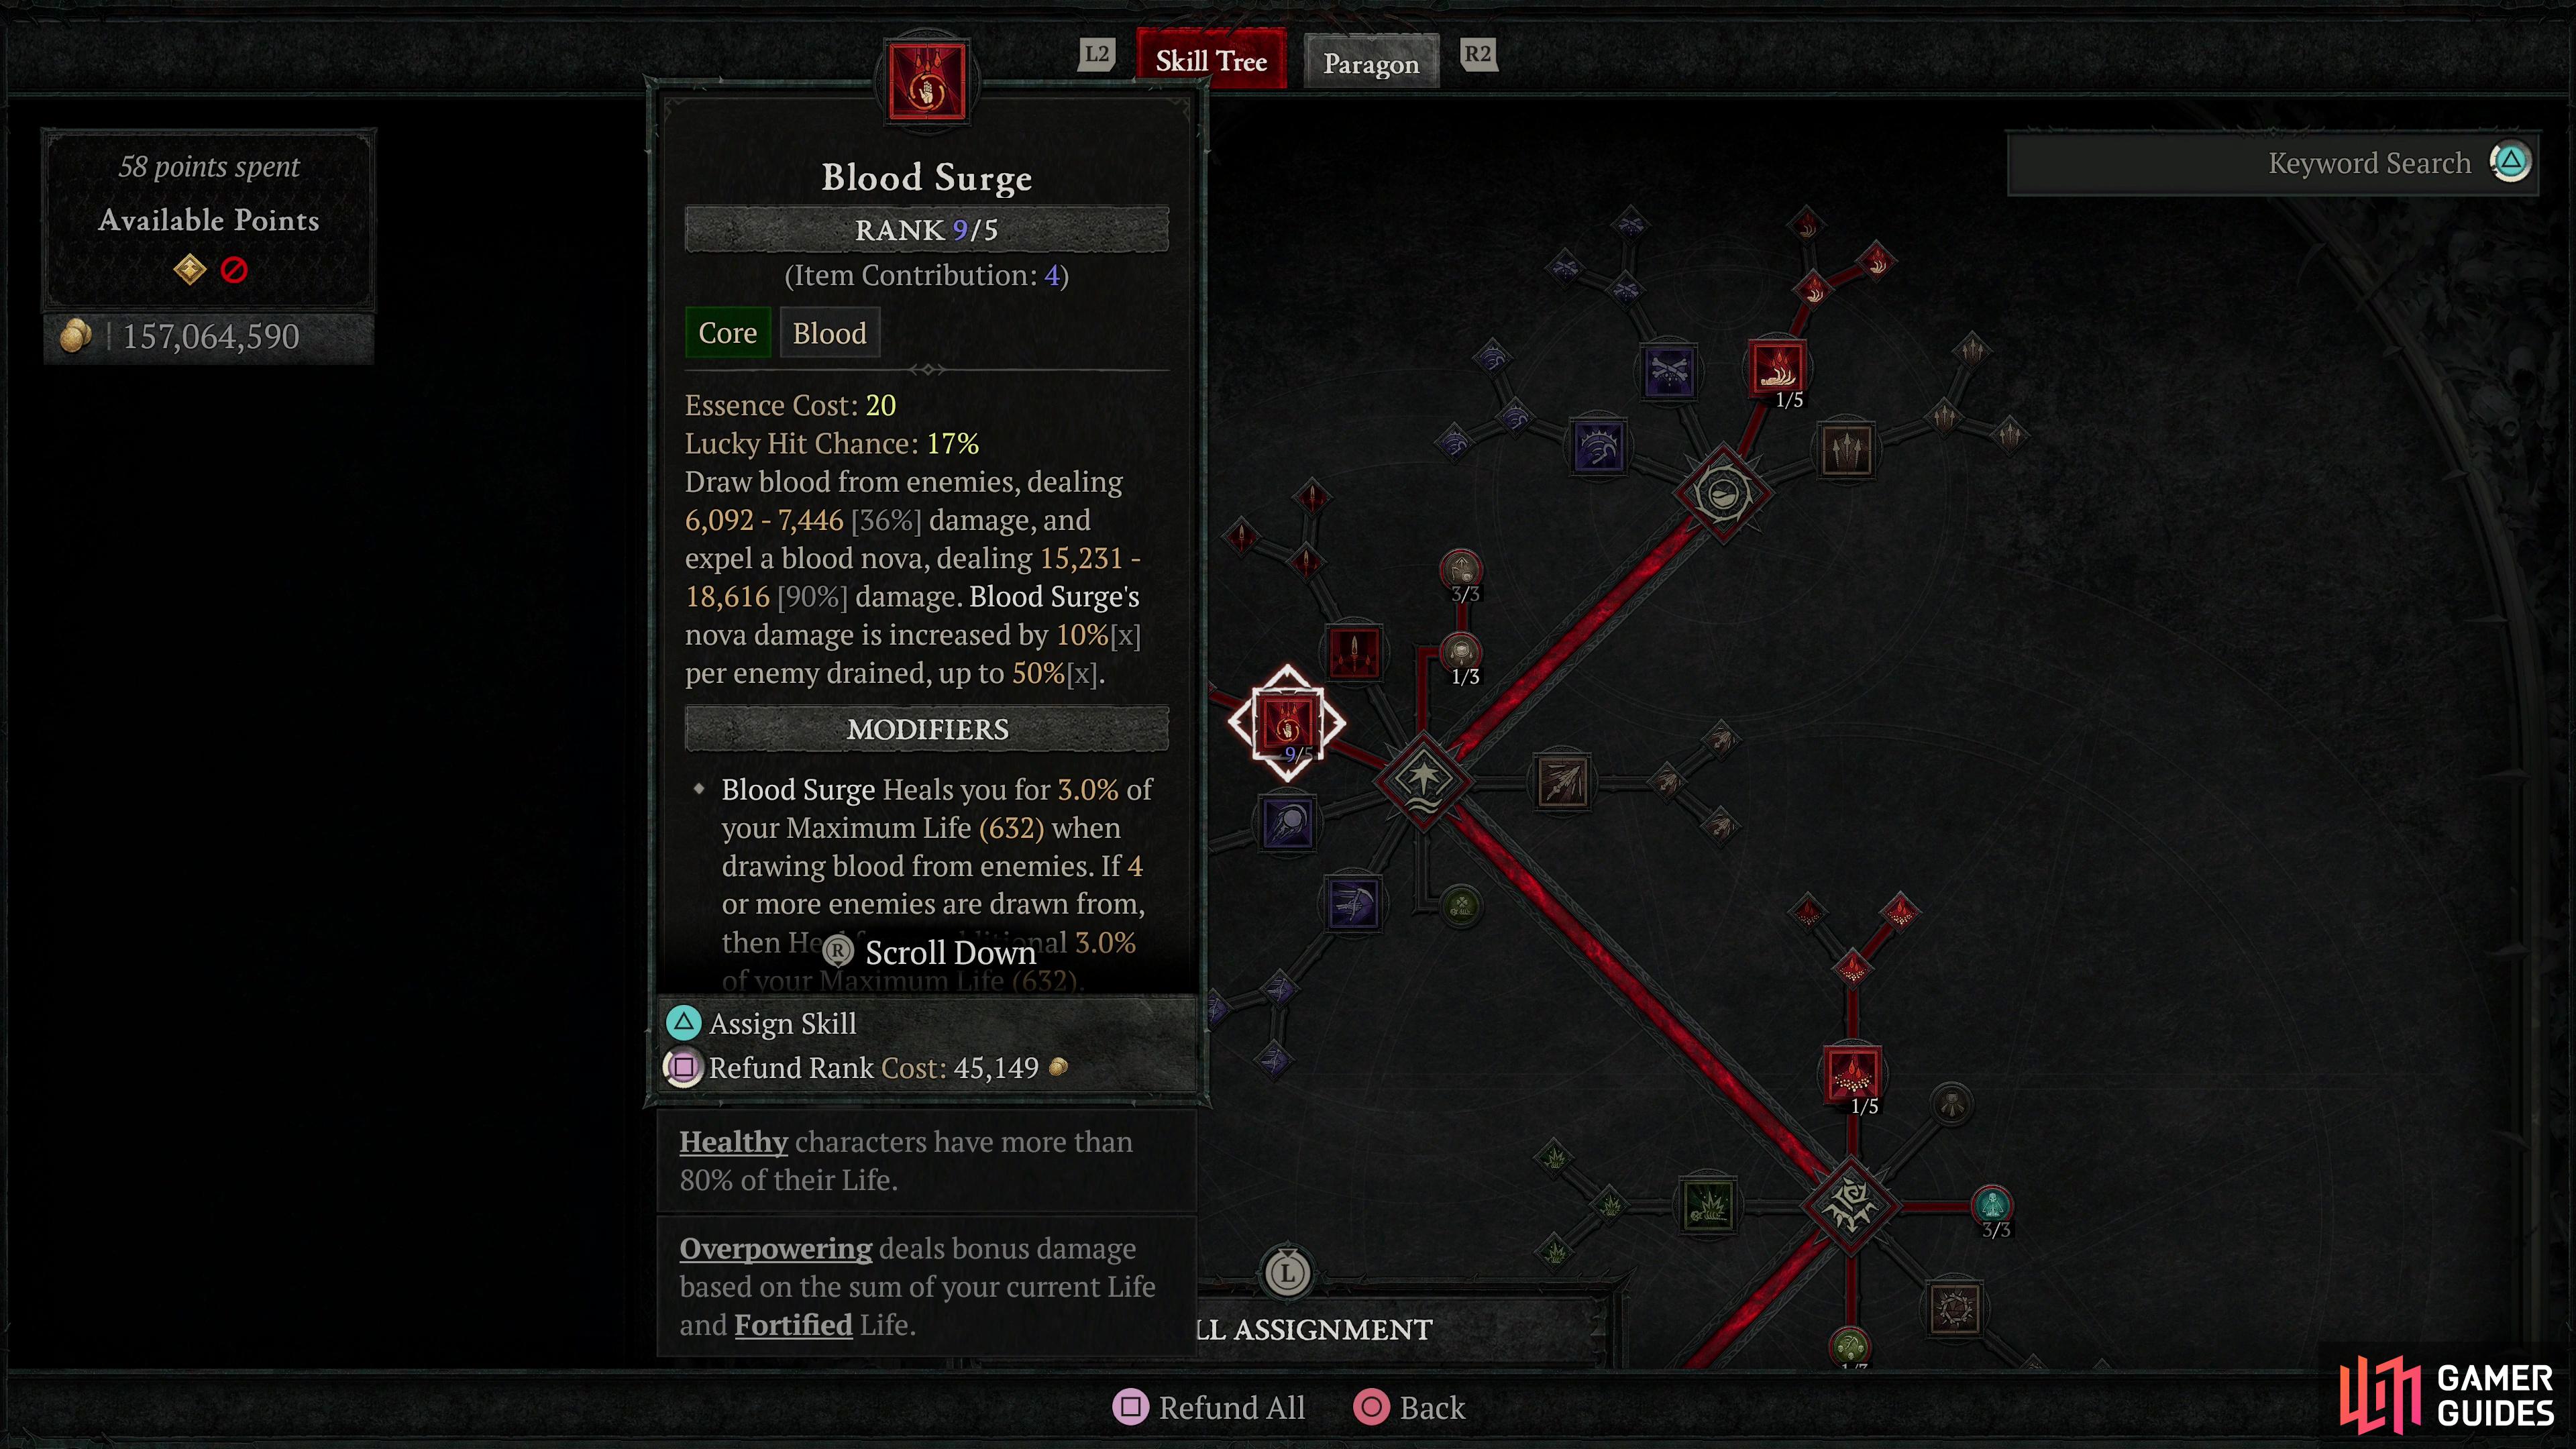 As the name of the build suggests, Blood Surge is our primary skill.